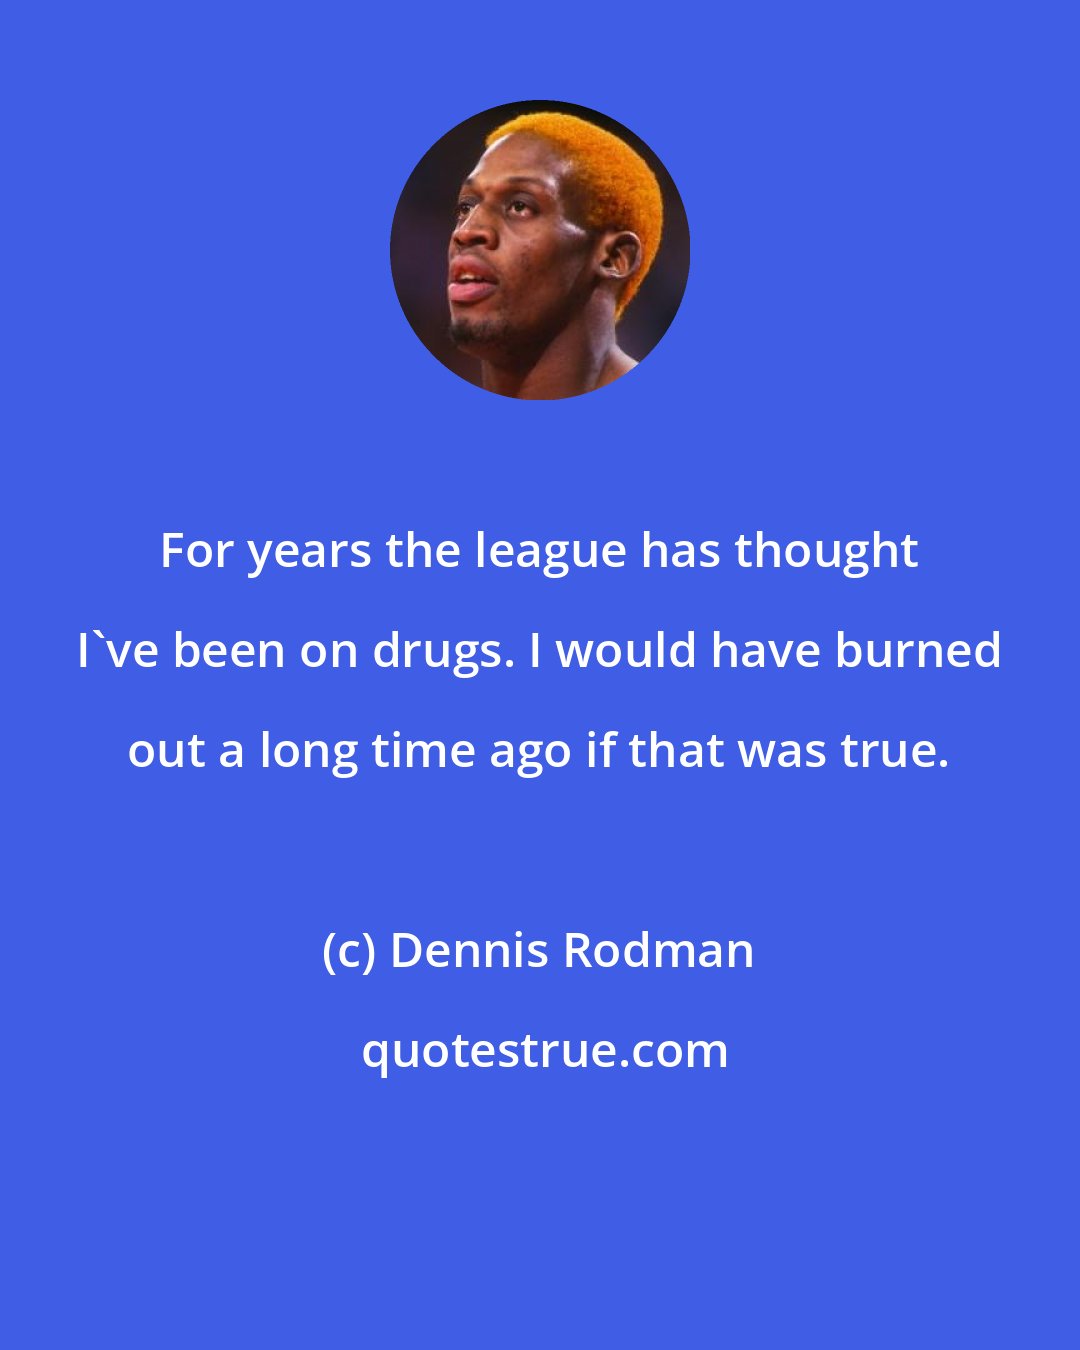 Dennis Rodman: For years the league has thought I've been on drugs. I would have burned out a long time ago if that was true.